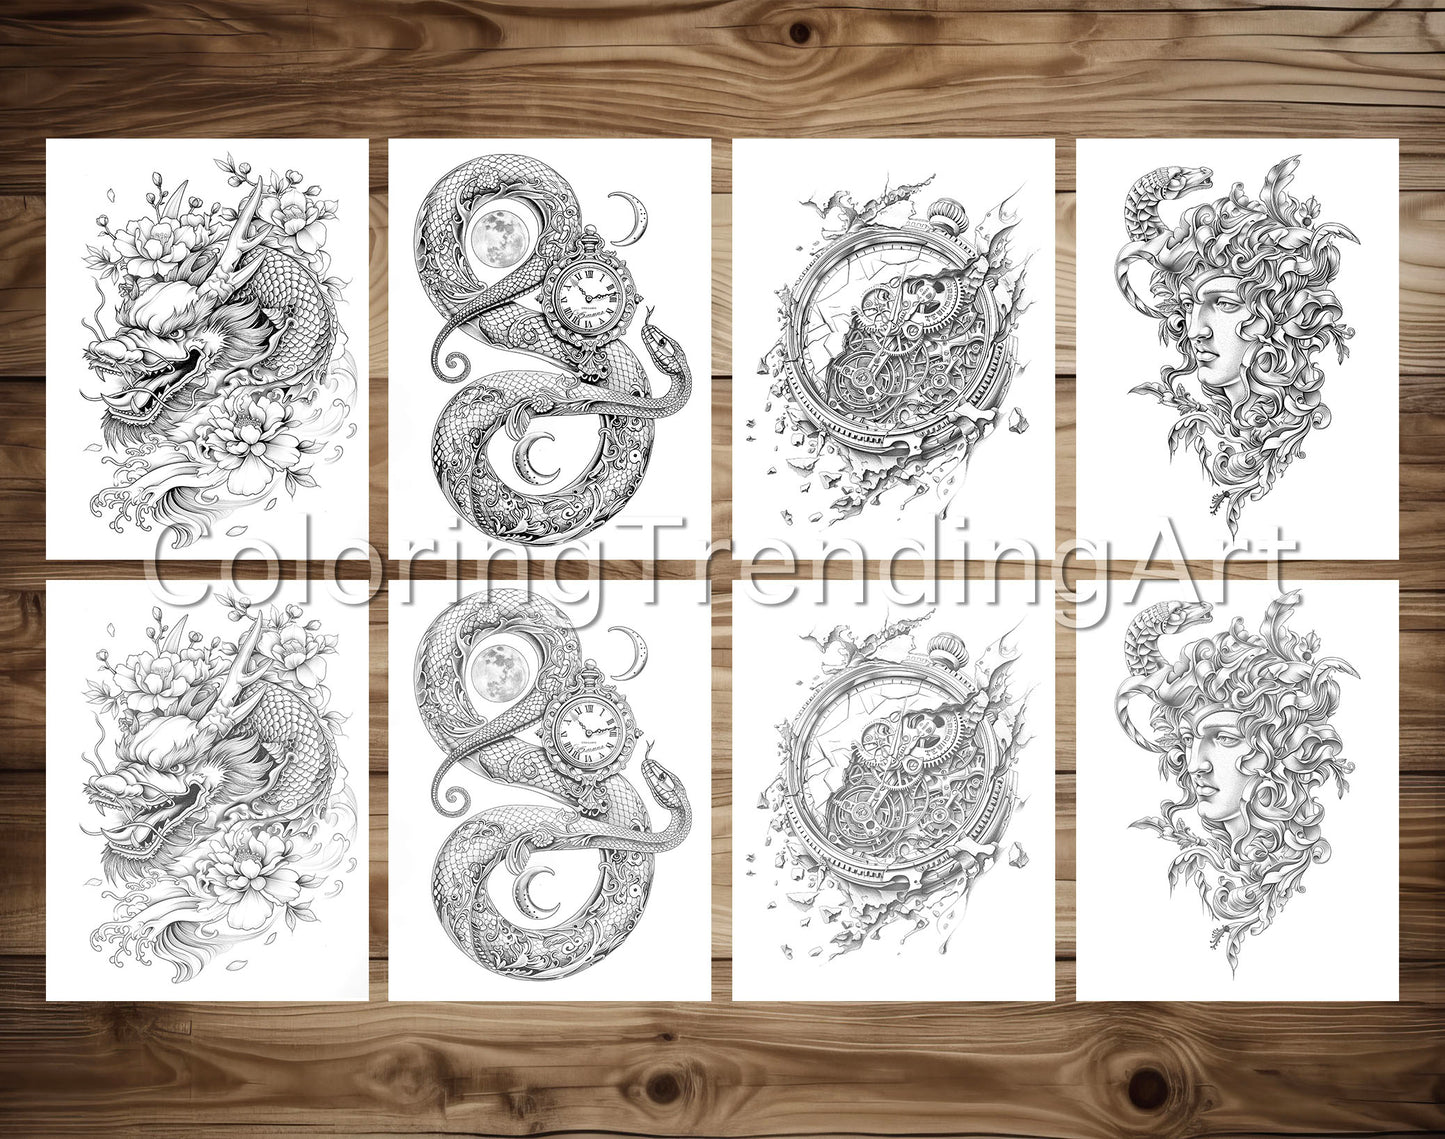 101 Tattoos Therapy 2 Grayscale Coloring Pages - Instant Download - Printable Dark/Light